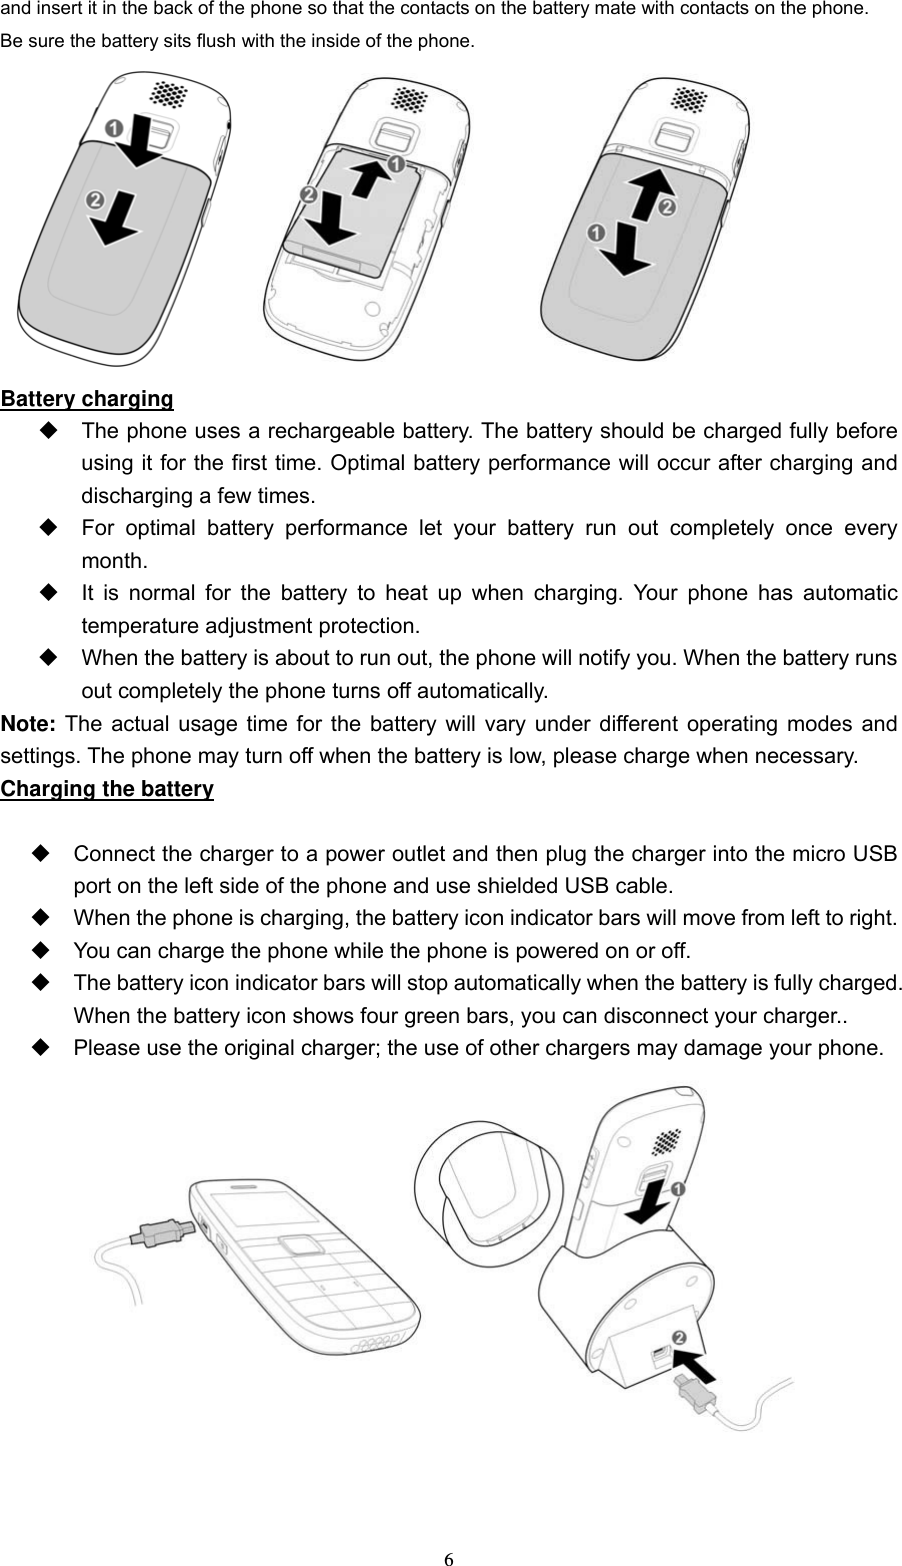  6and insert it in the back of the phone so that the contacts on the battery mate with contacts on the phone.     Be sure the battery sits flush with the inside of the phone.      Battery charging   The phone uses a rechargeable battery. The battery should be charged fully before using it for the first time. Optimal battery performance will occur after charging and discharging a few times.     For optimal battery performance let your battery run out completely once every month.    It is normal for the battery to heat up when charging. Your phone has automatic temperature adjustment protection.     When the battery is about to run out, the phone will notify you. When the battery runs out completely the phone turns off automatically.   Note: The actual usage time for the battery will vary under different operating modes and settings. The phone may turn off when the battery is low, please charge when necessary.   Charging the battery    Connect the charger to a power outlet and then plug the charger into the micro USB port on the left side of the phone and use shielded USB cable.   When the phone is charging, the battery icon indicator bars will move from left to right.   You can charge the phone while the phone is powered on or off.     The battery icon indicator bars will stop automatically when the battery is fully charged. When the battery icon shows four green bars, you can disconnect your charger..     Please use the original charger; the use of other chargers may damage your phone.  